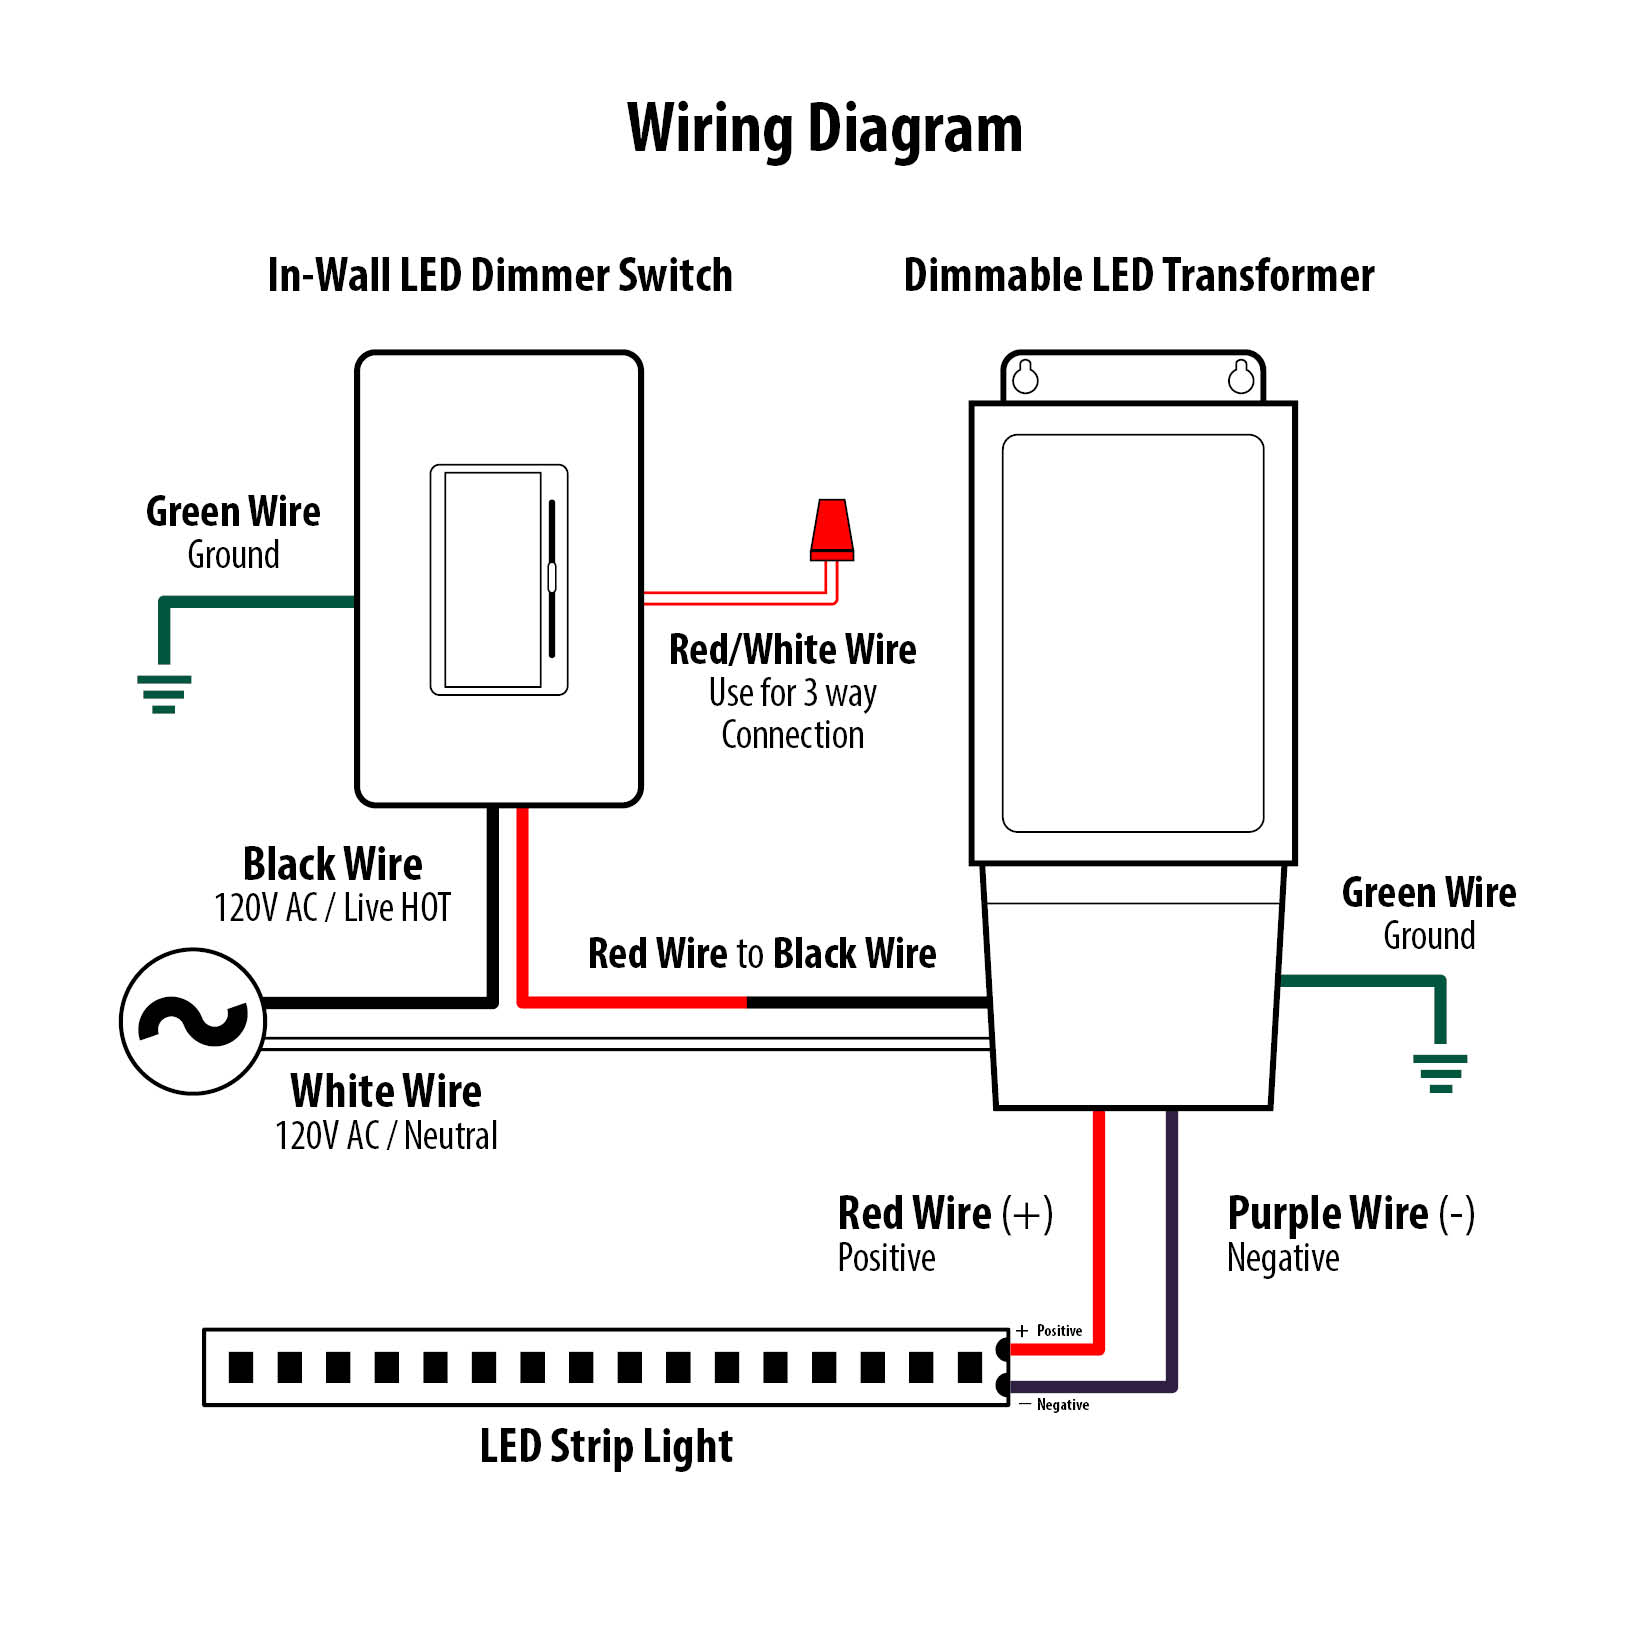 In Wall LED Dimmer Switch 